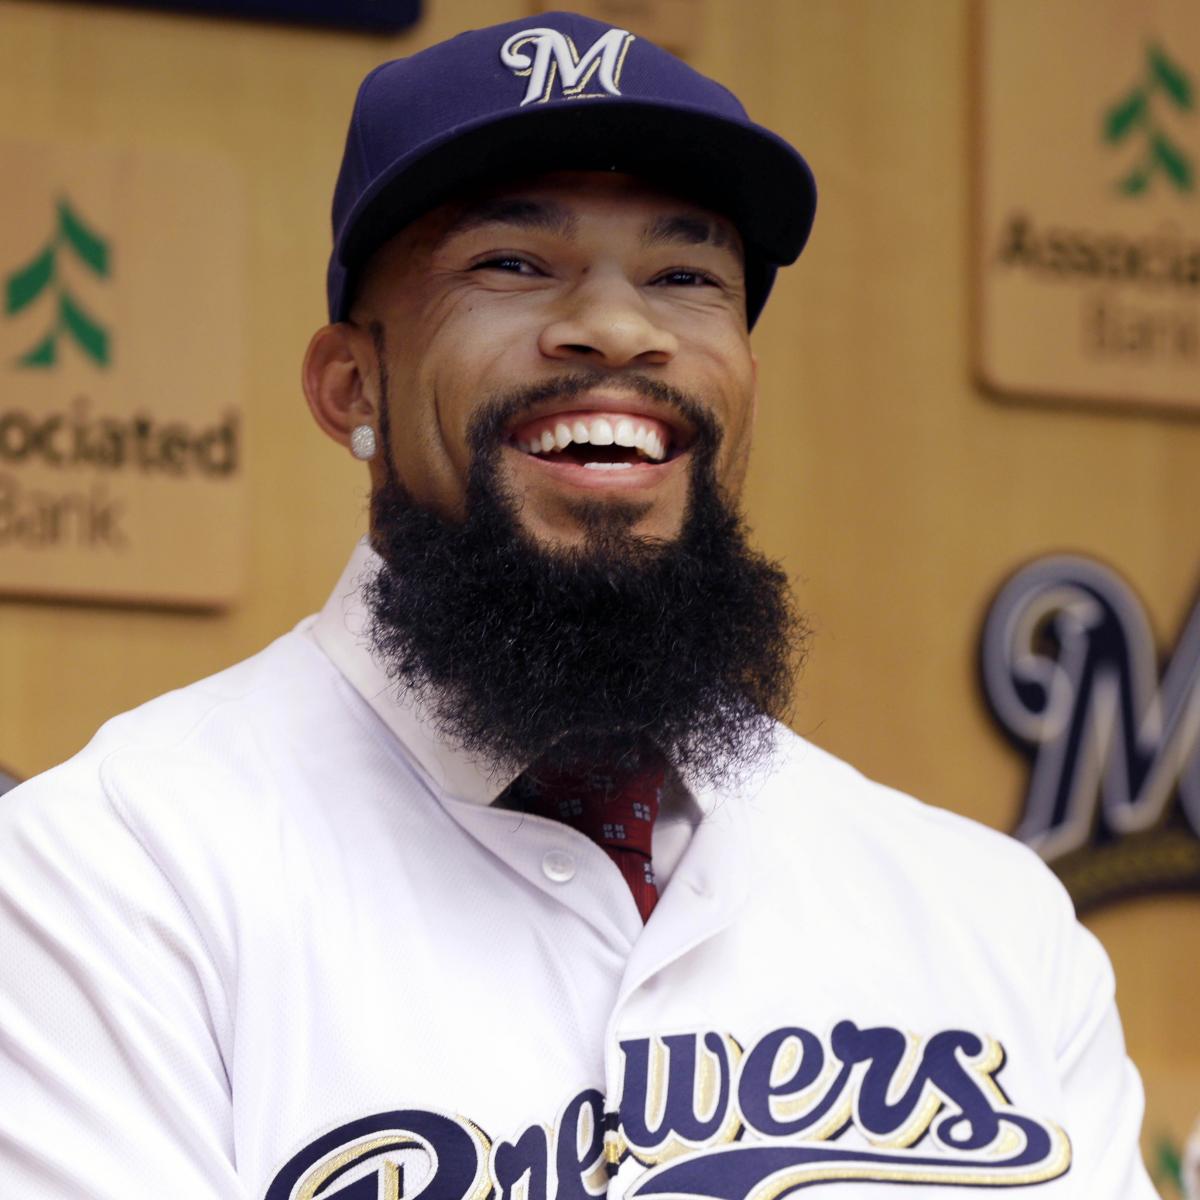 For Eric Thames, fame in Korea intruded on everything - even his